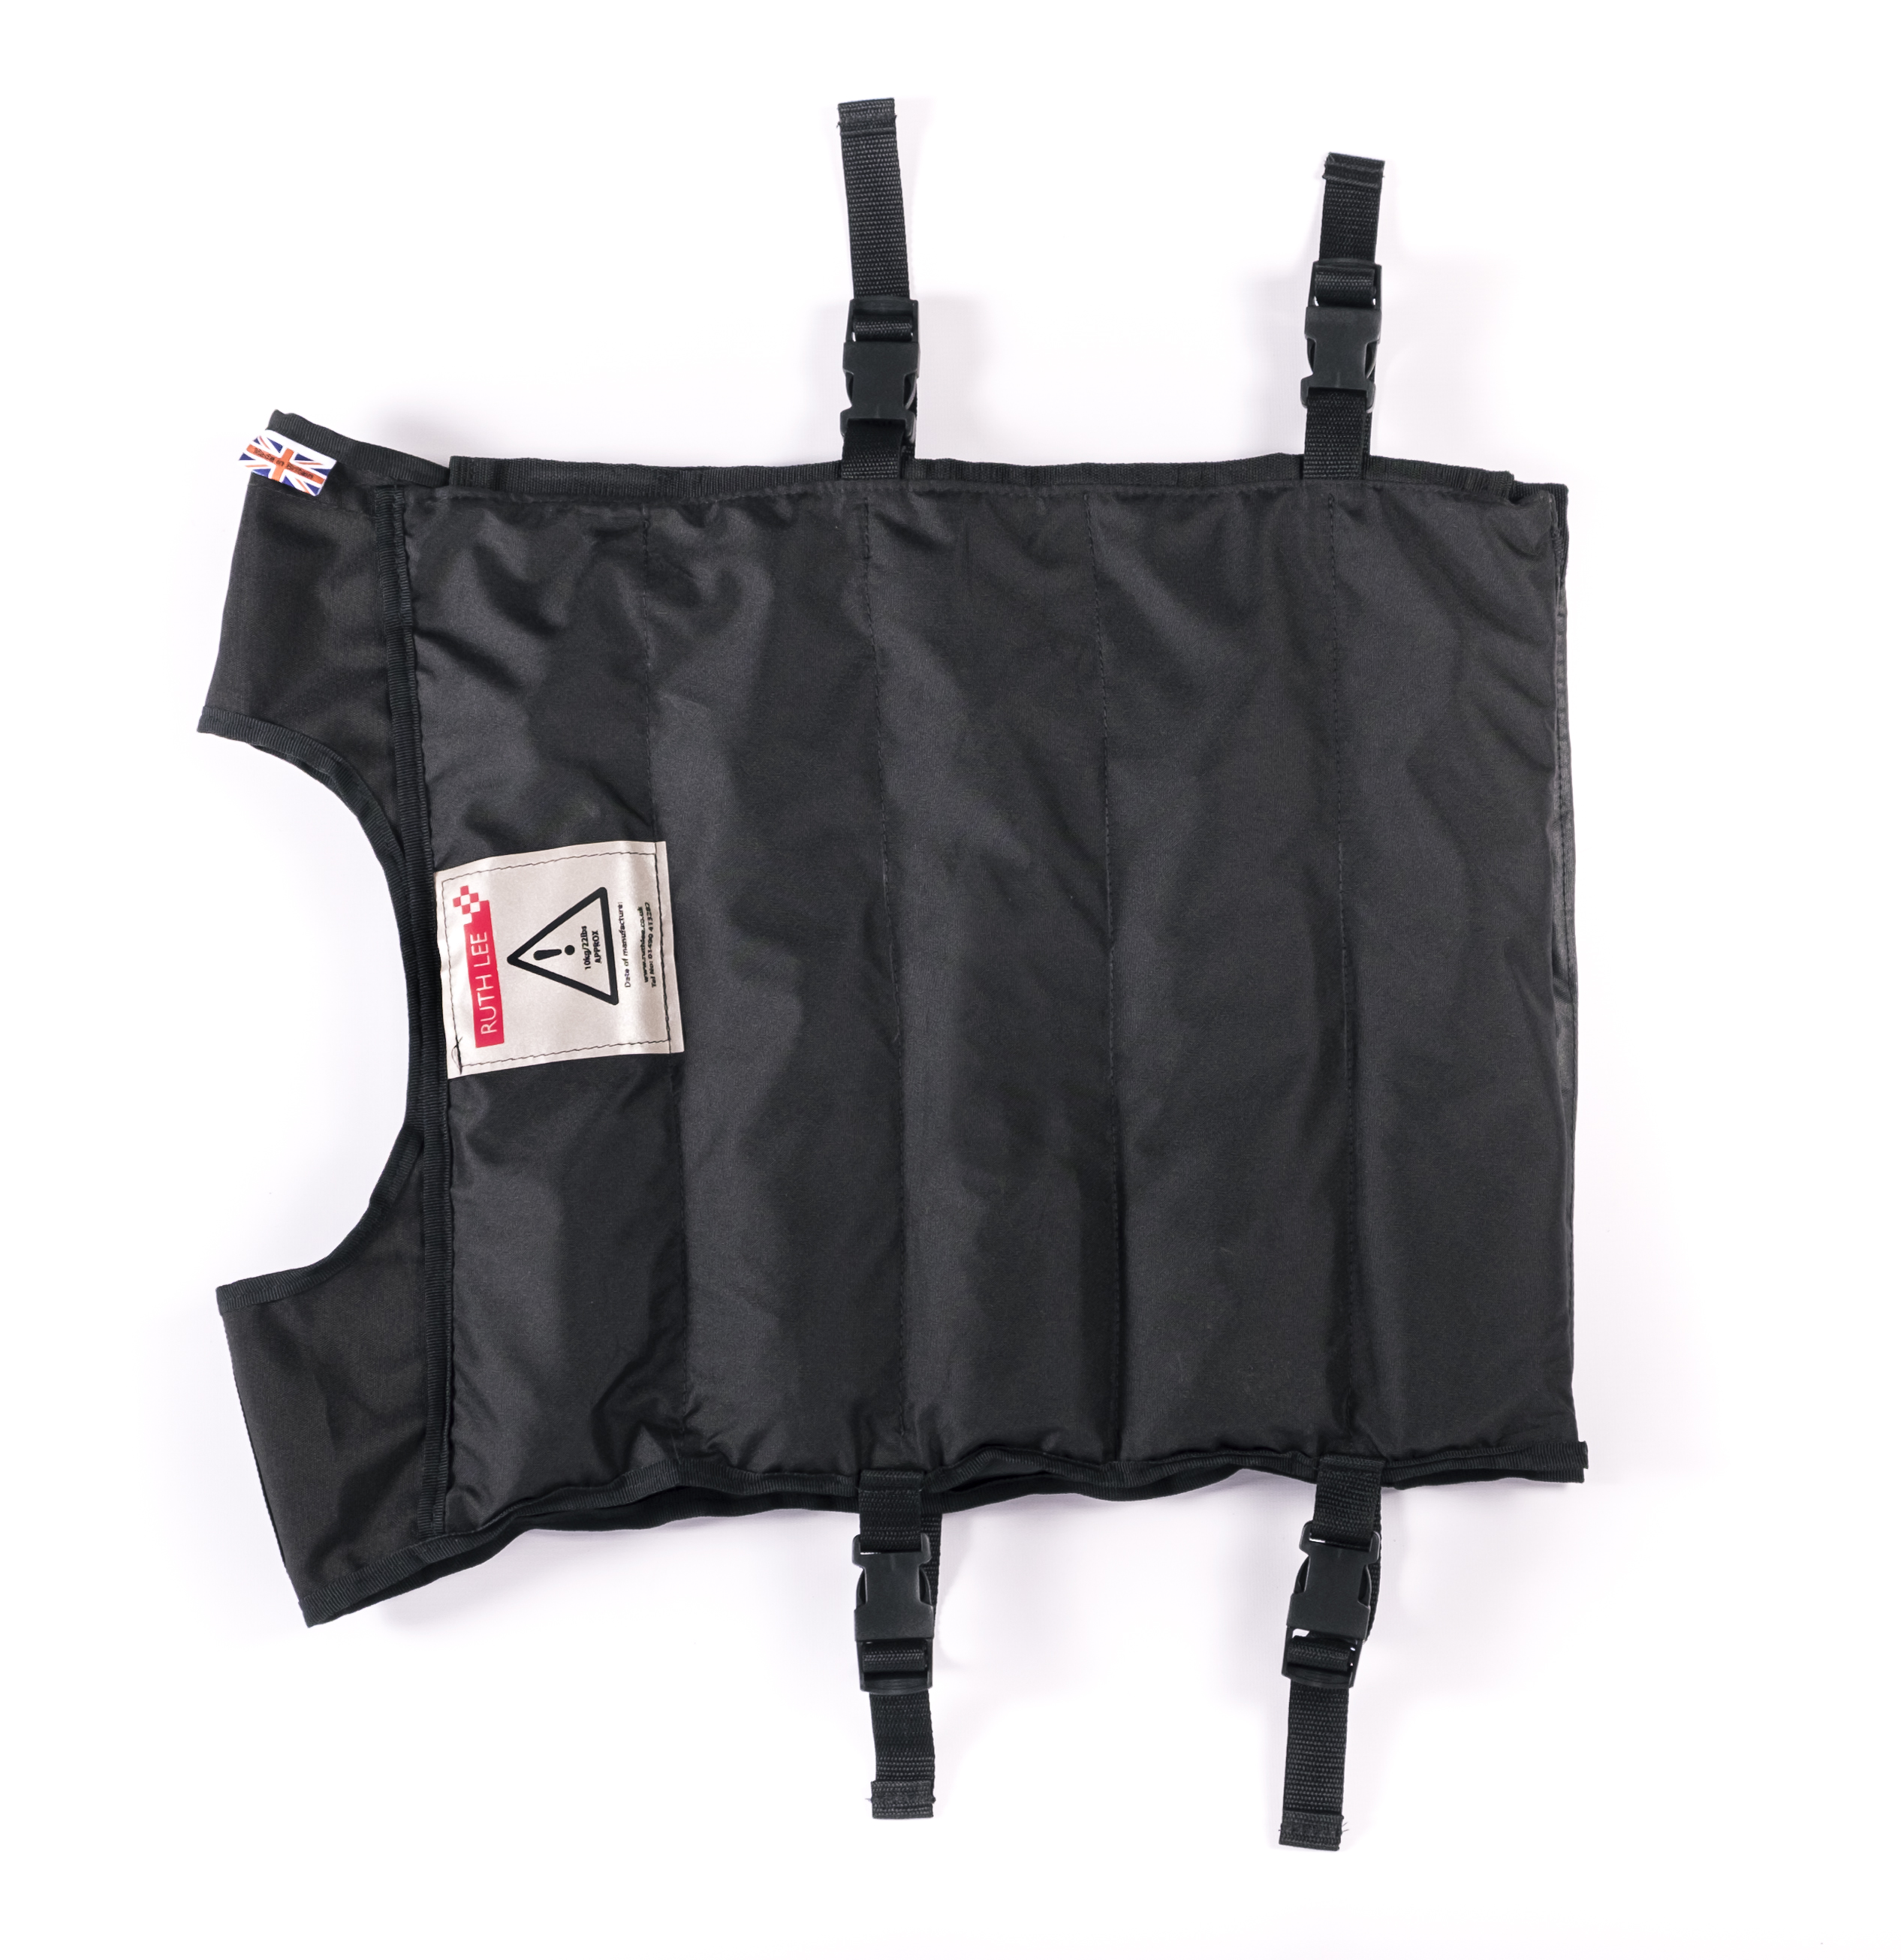 10KG WEIGHTED VEST FOR GENERAL DUTY ADULT TRAINING MANIKIN